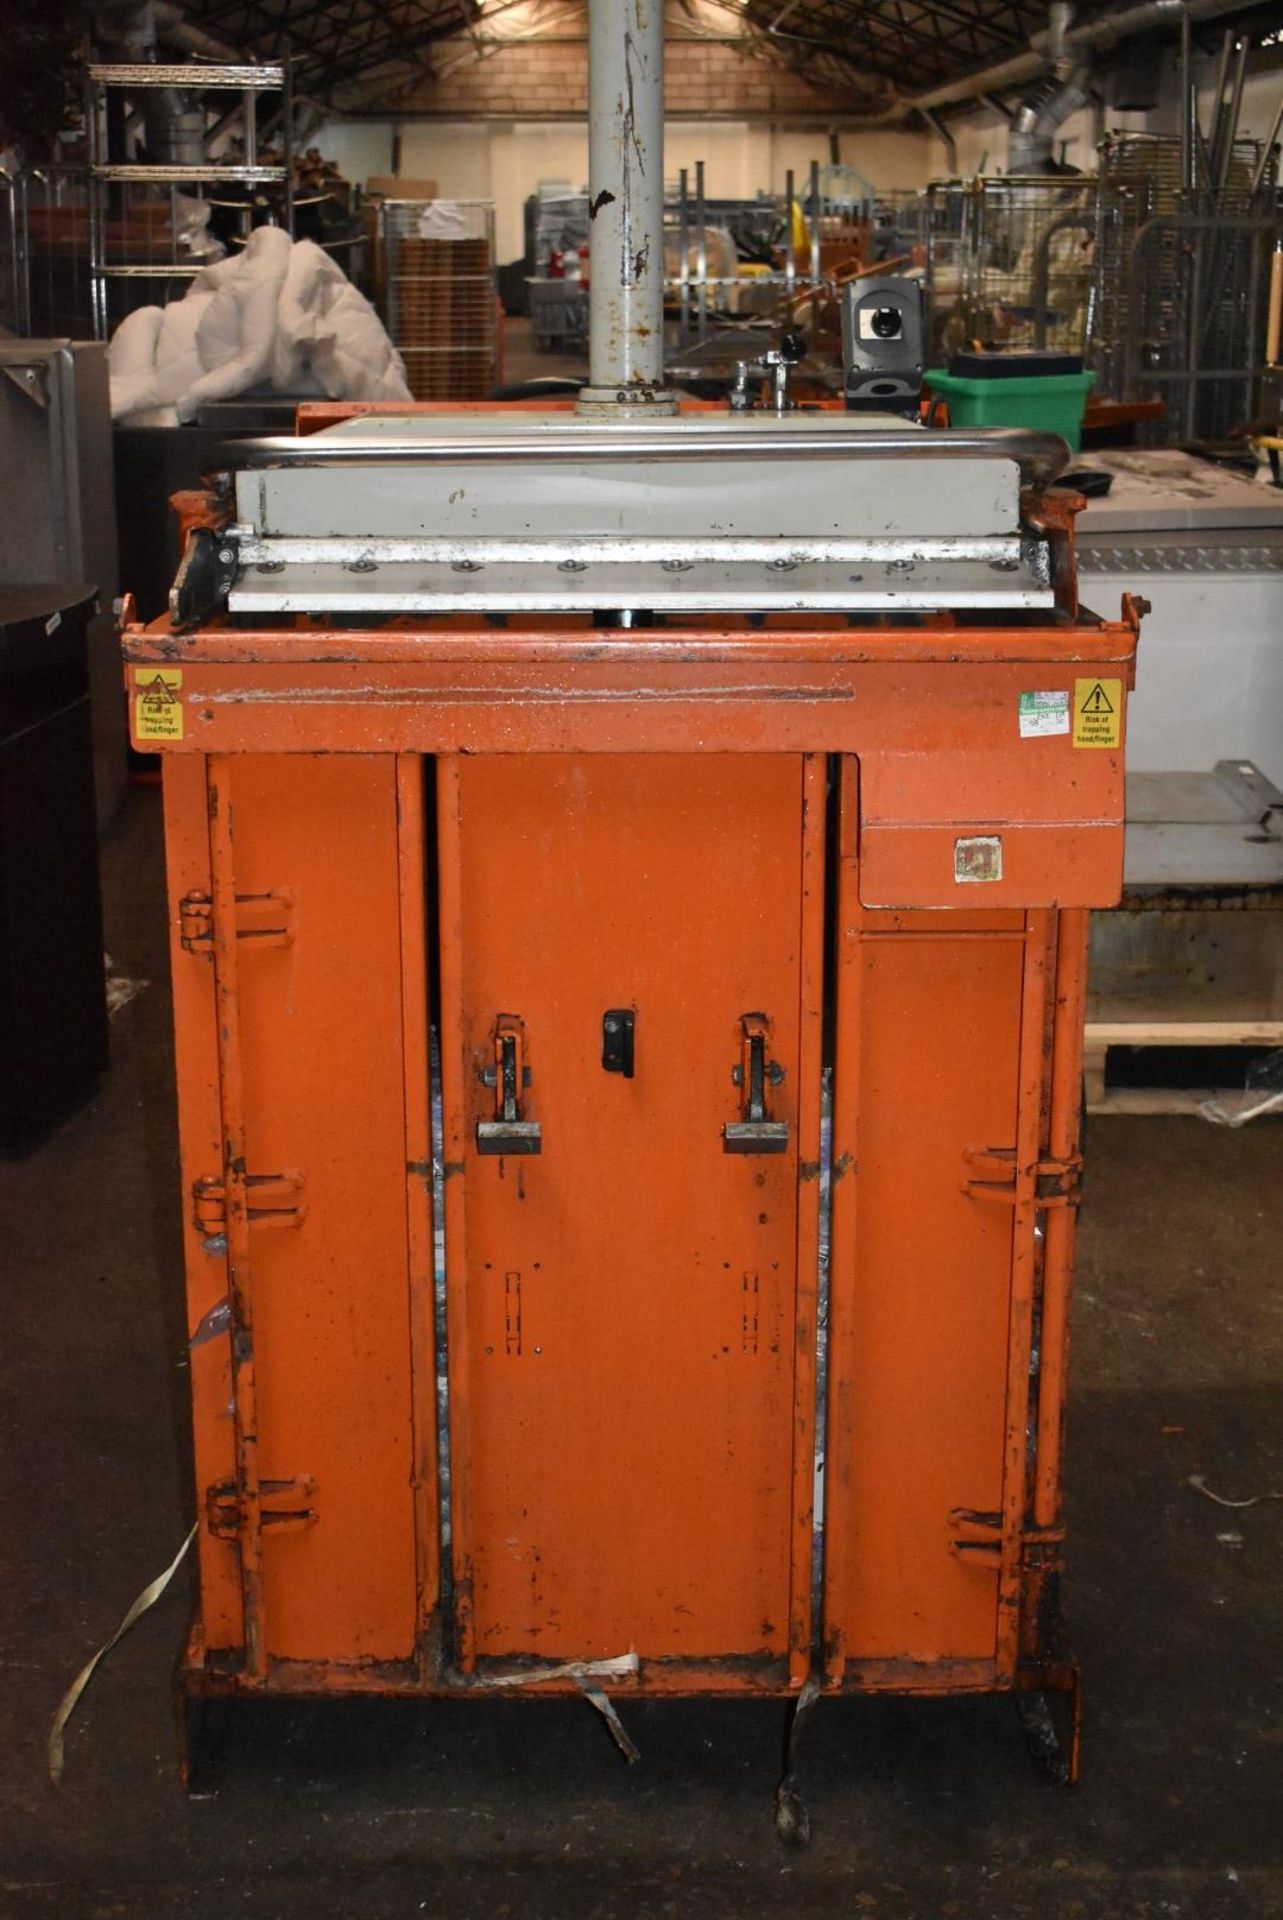 1 x Orwak 5010 Hydraulic Press Compact Cardboard Baler - Used For Compacting Recyclable or Non-